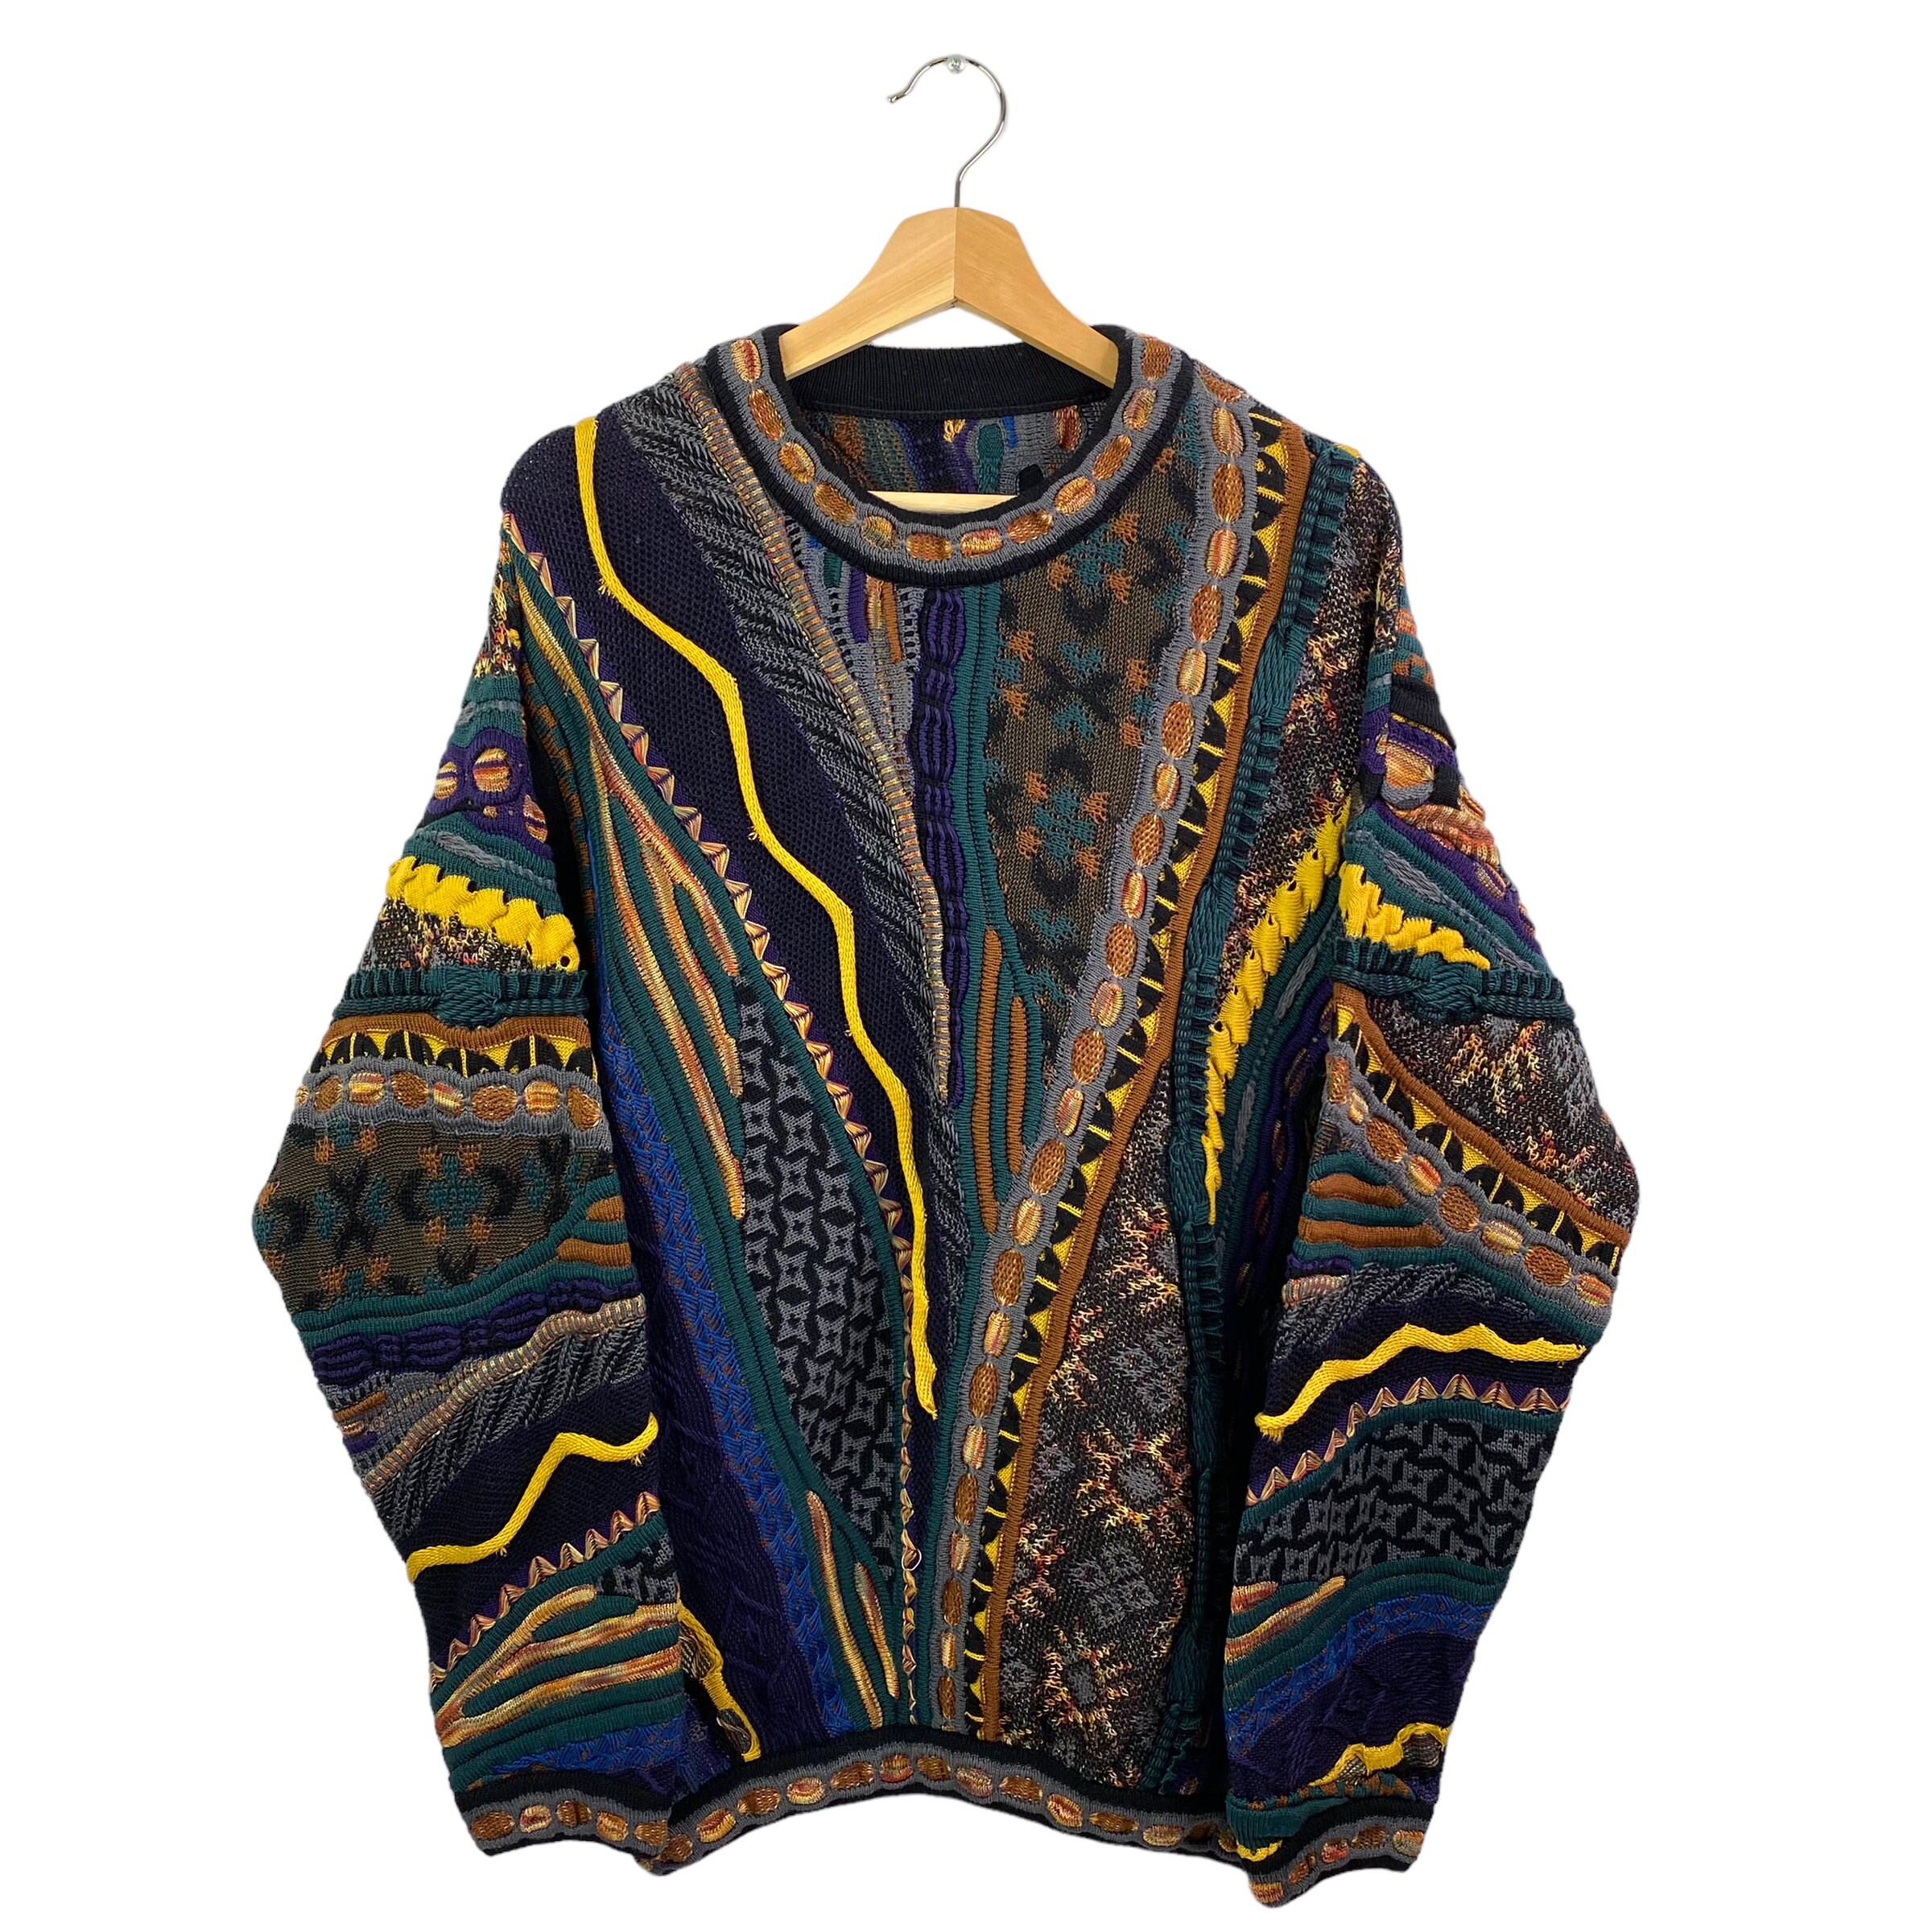 VTG Tundra Thick 3D Knit Cotton Colorful Sweater Coogi Style